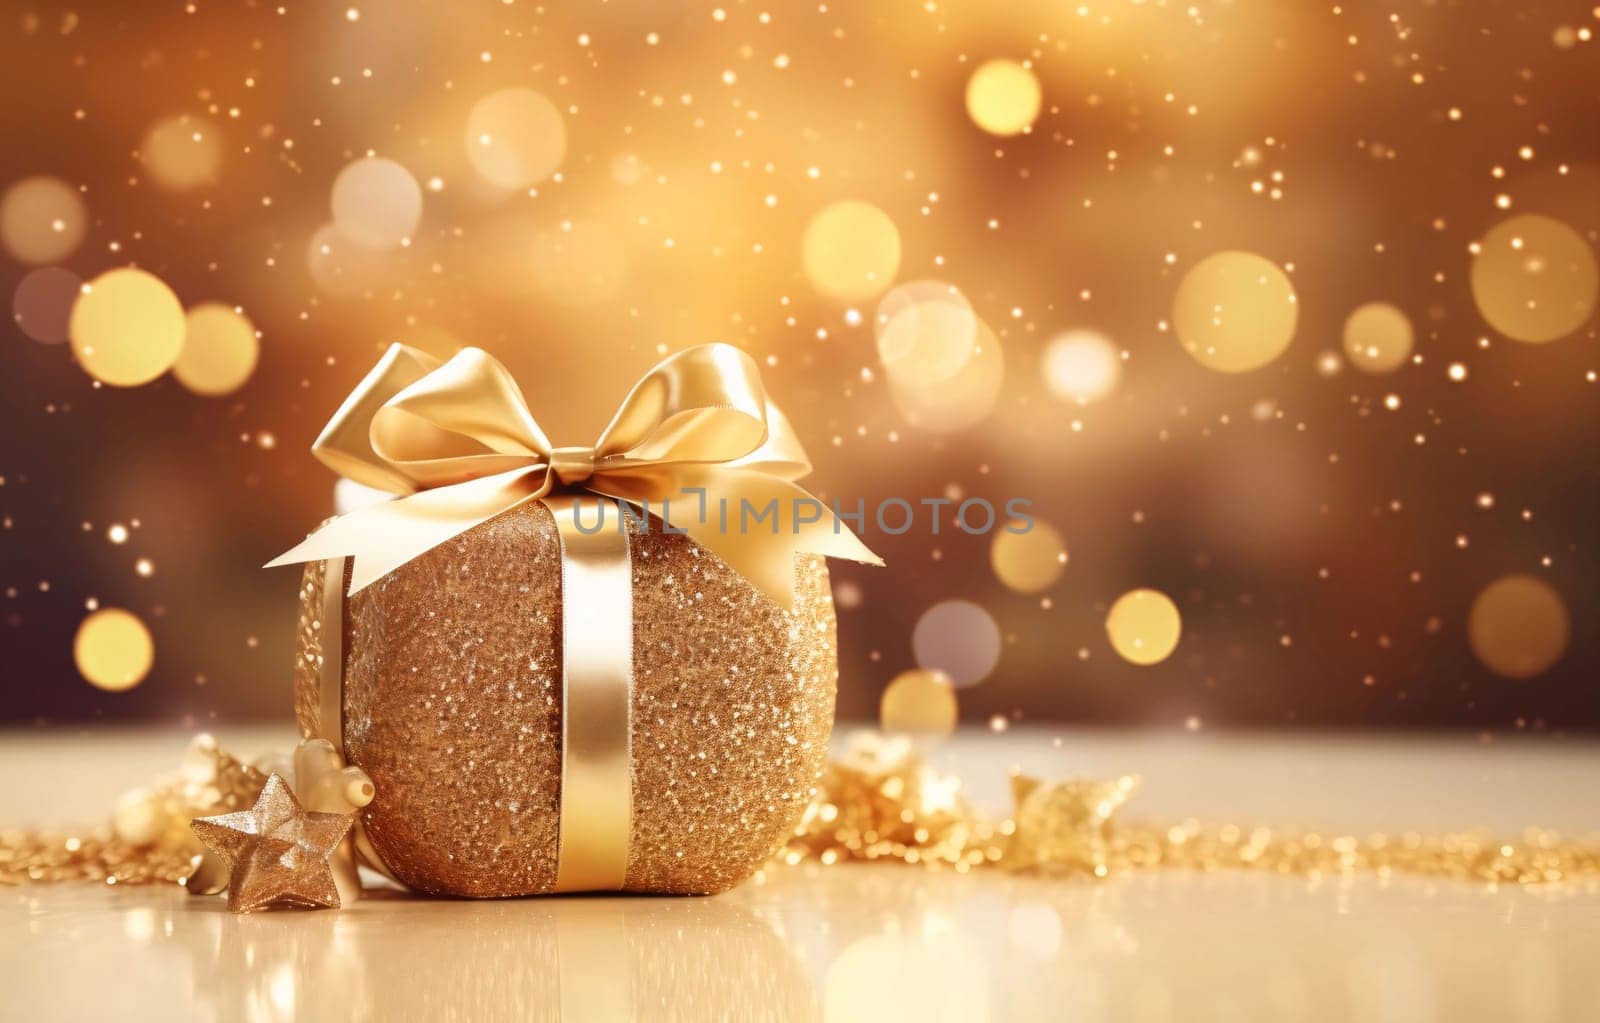 Gold gift with glitter with gold bow around glitter in the background gold effect sides. Gifts as a day symbol of present and love. A time of falling in love and love.